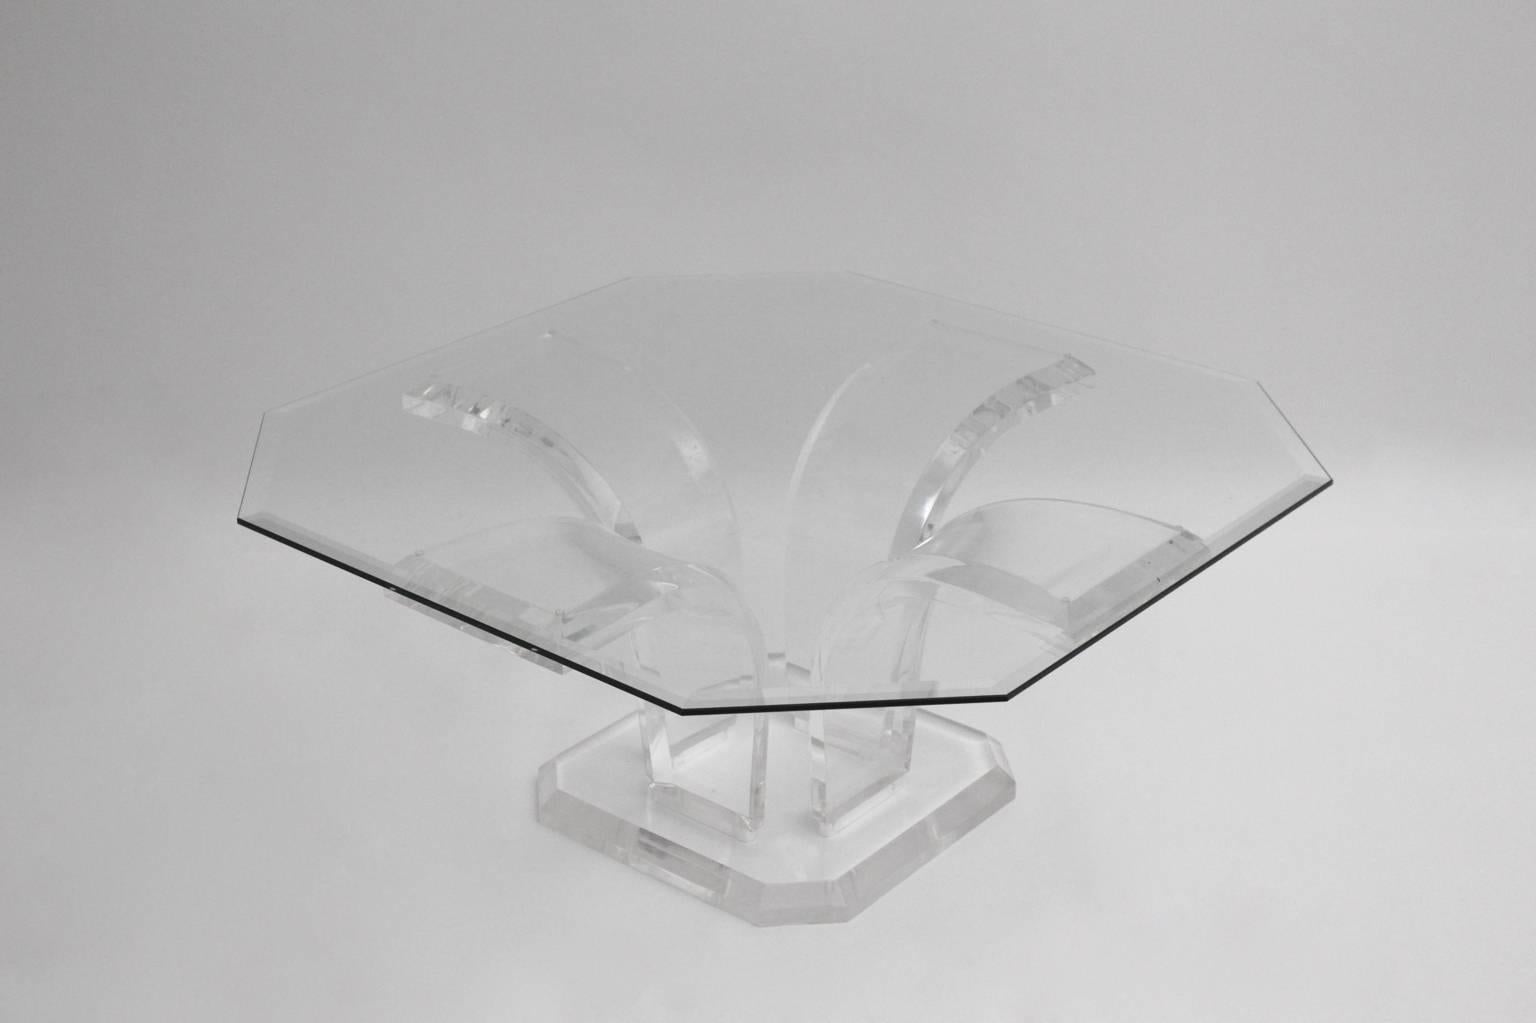 Mid Century Modern clear lucite coffee table or sofa table base with an octagonal shaped glass top, which features cut edges.
The base has five separable parts and the top rests on the frame.
Very elegant furniture in very good condition
Glass